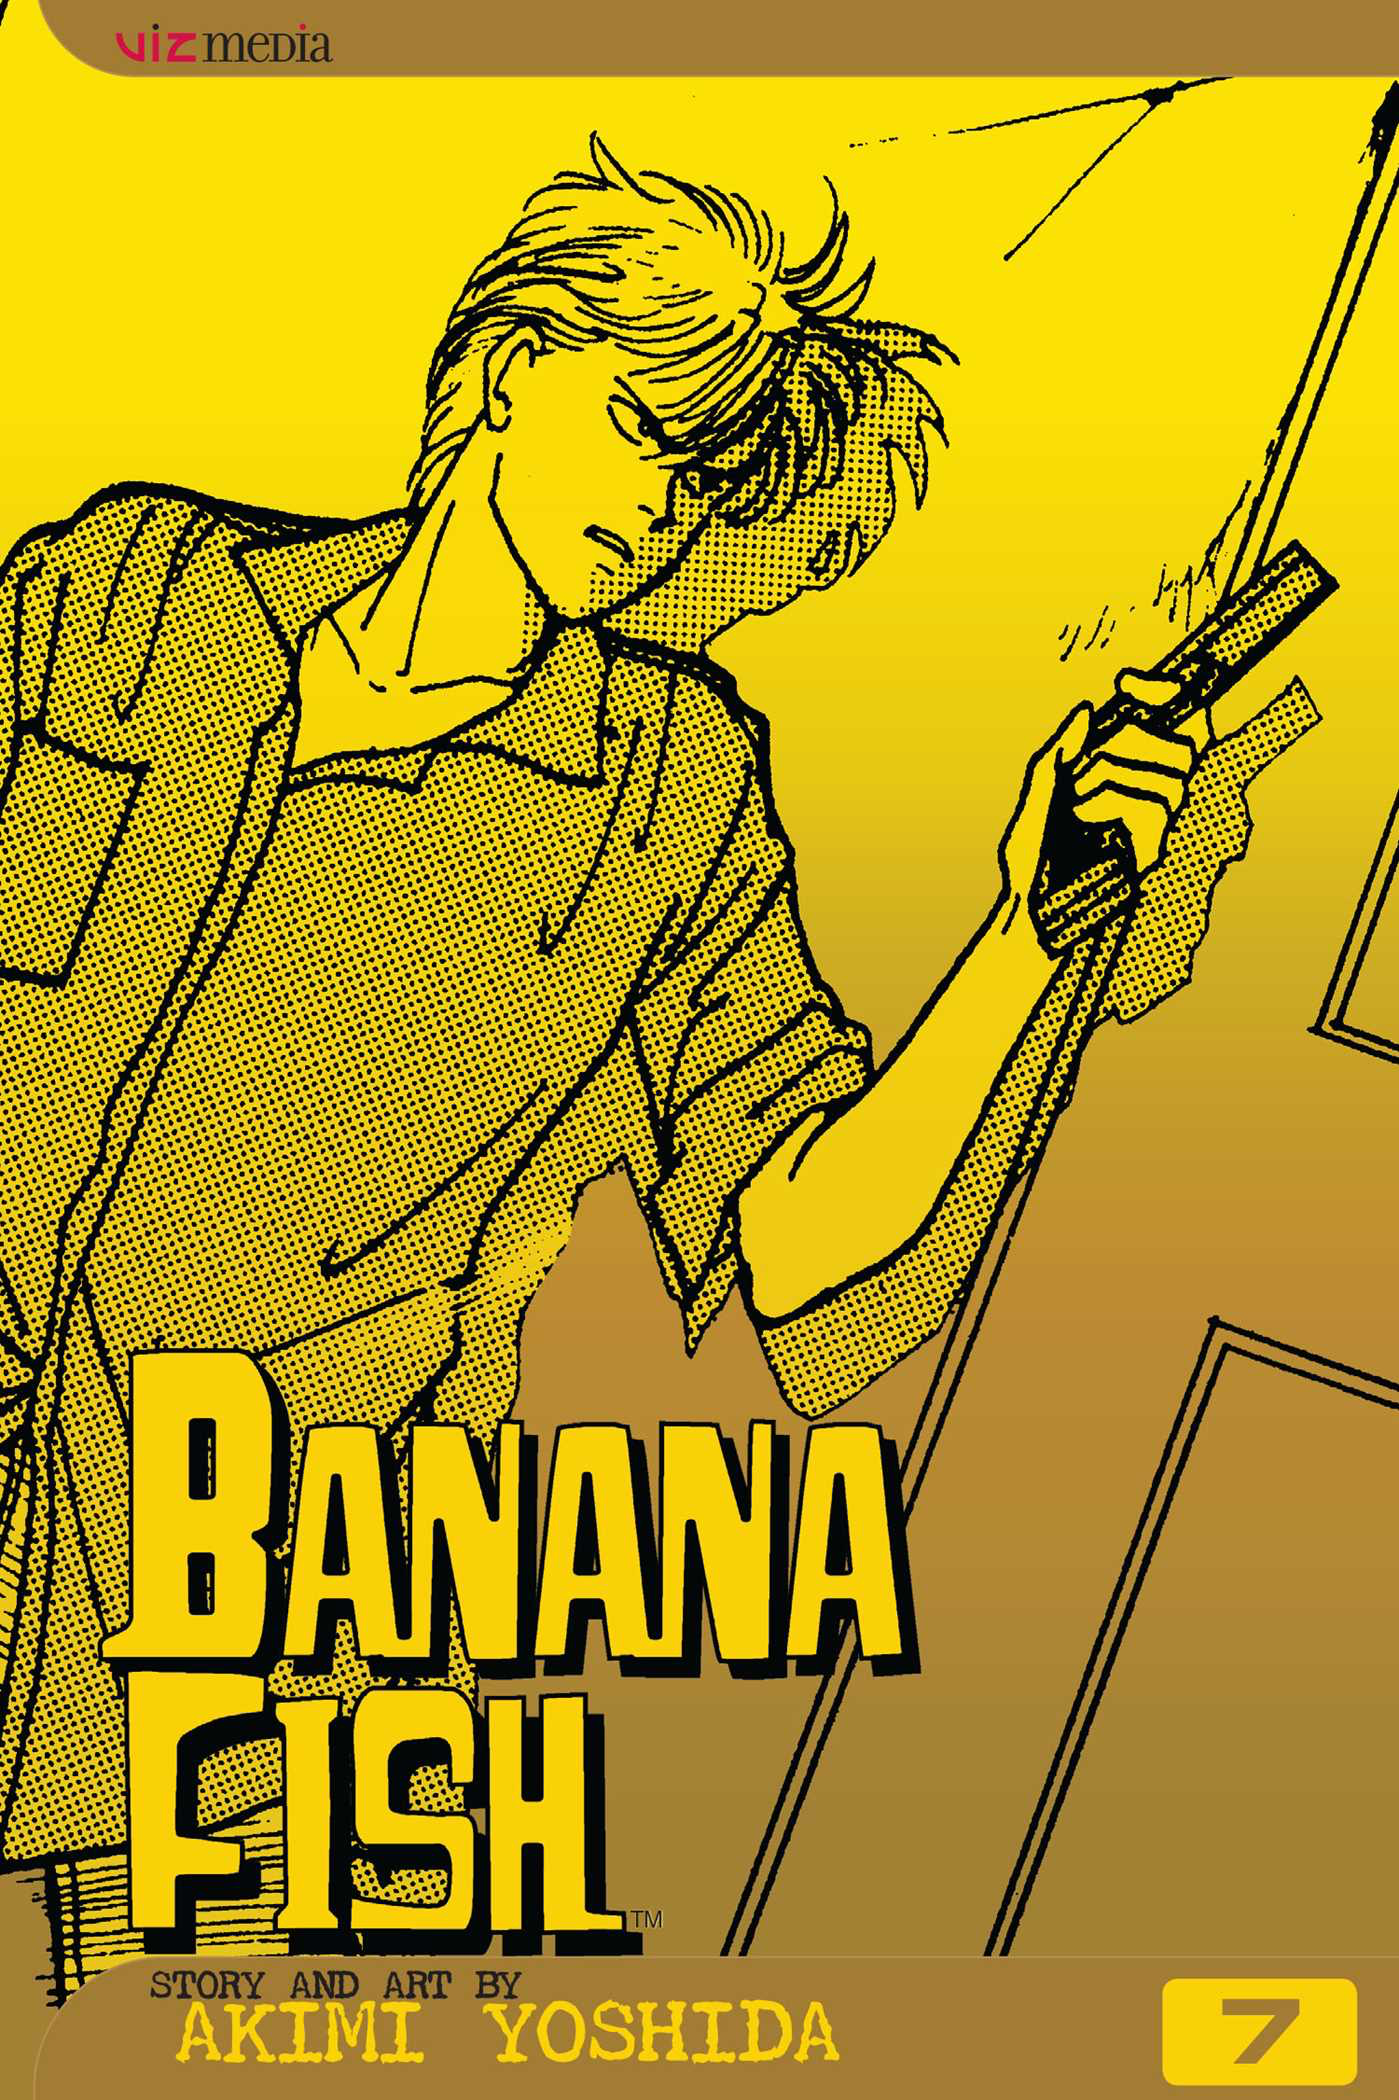 Discuss Everything About BANANA FISH Wiki